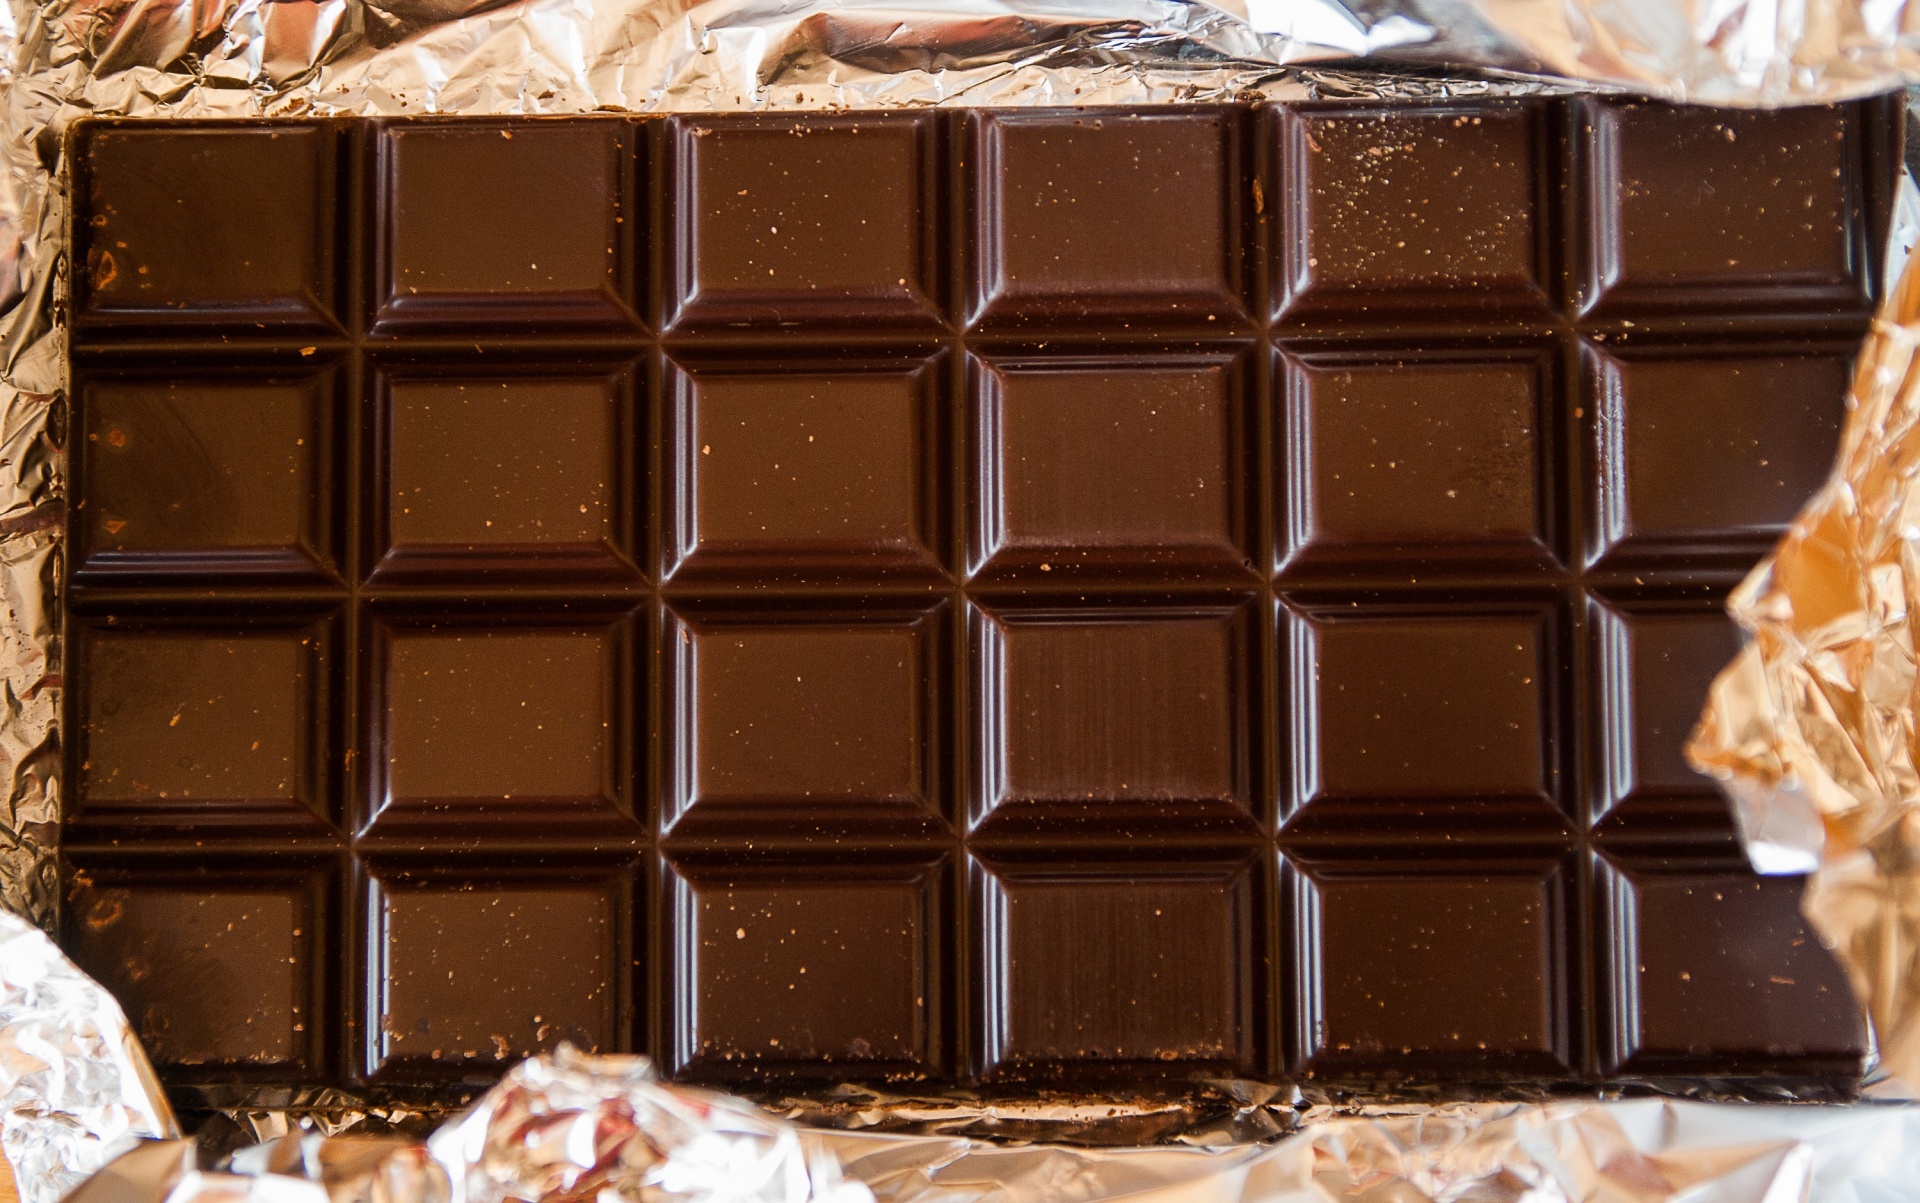 Chocolate Bar Laying on Foil